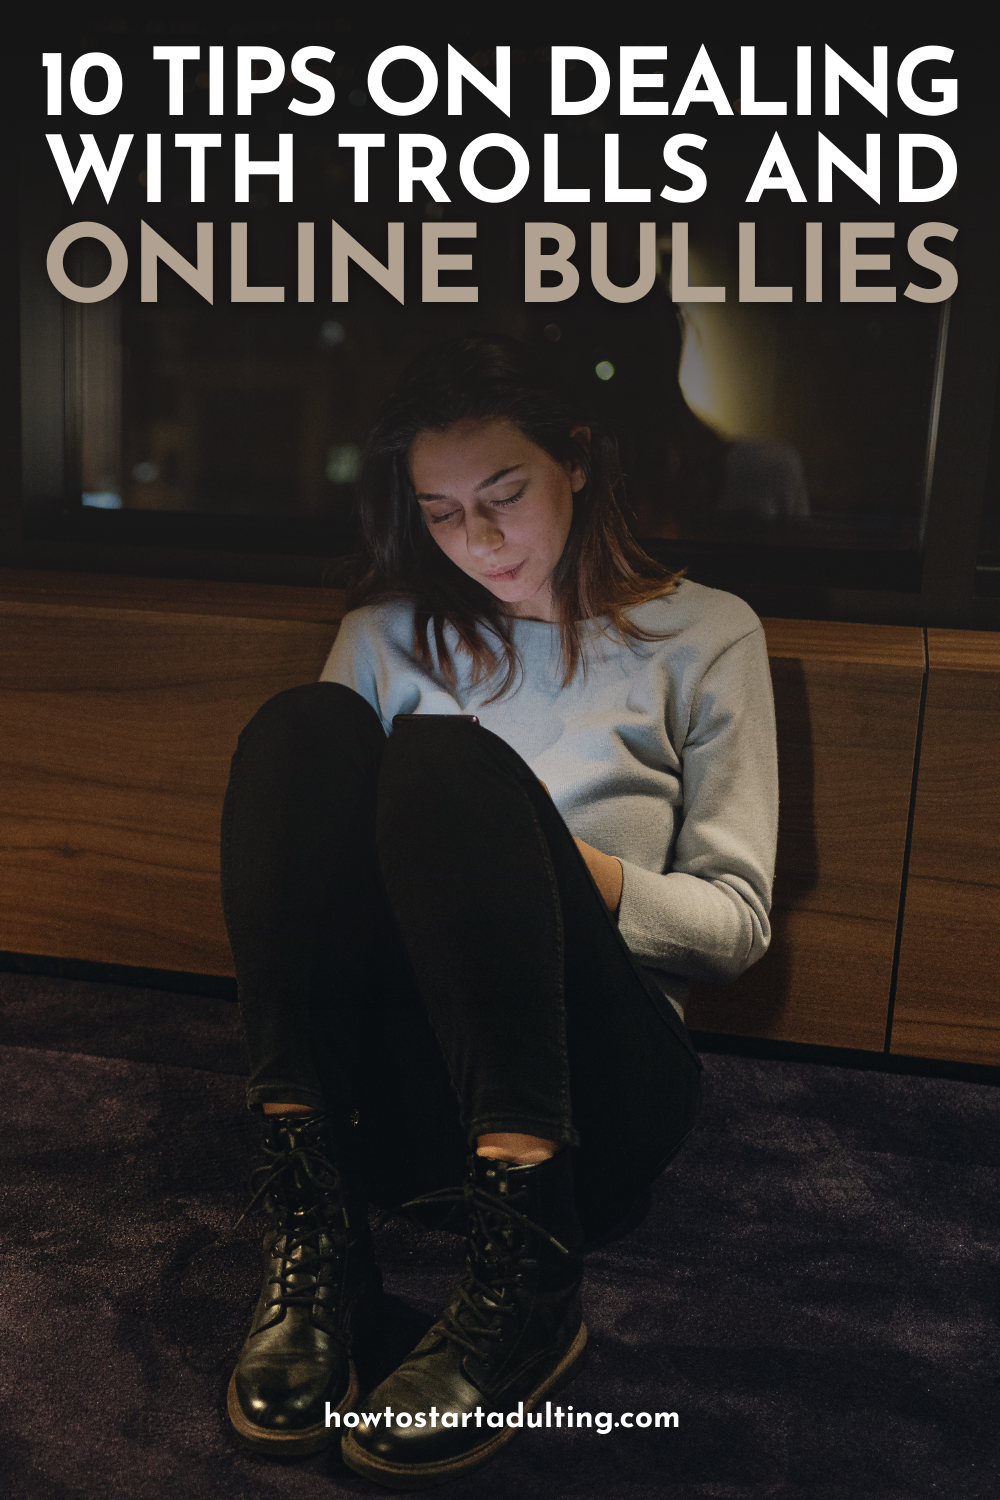 Tips On How To Deal With Online Bullies Or Trolls, advice on Internet bullying 